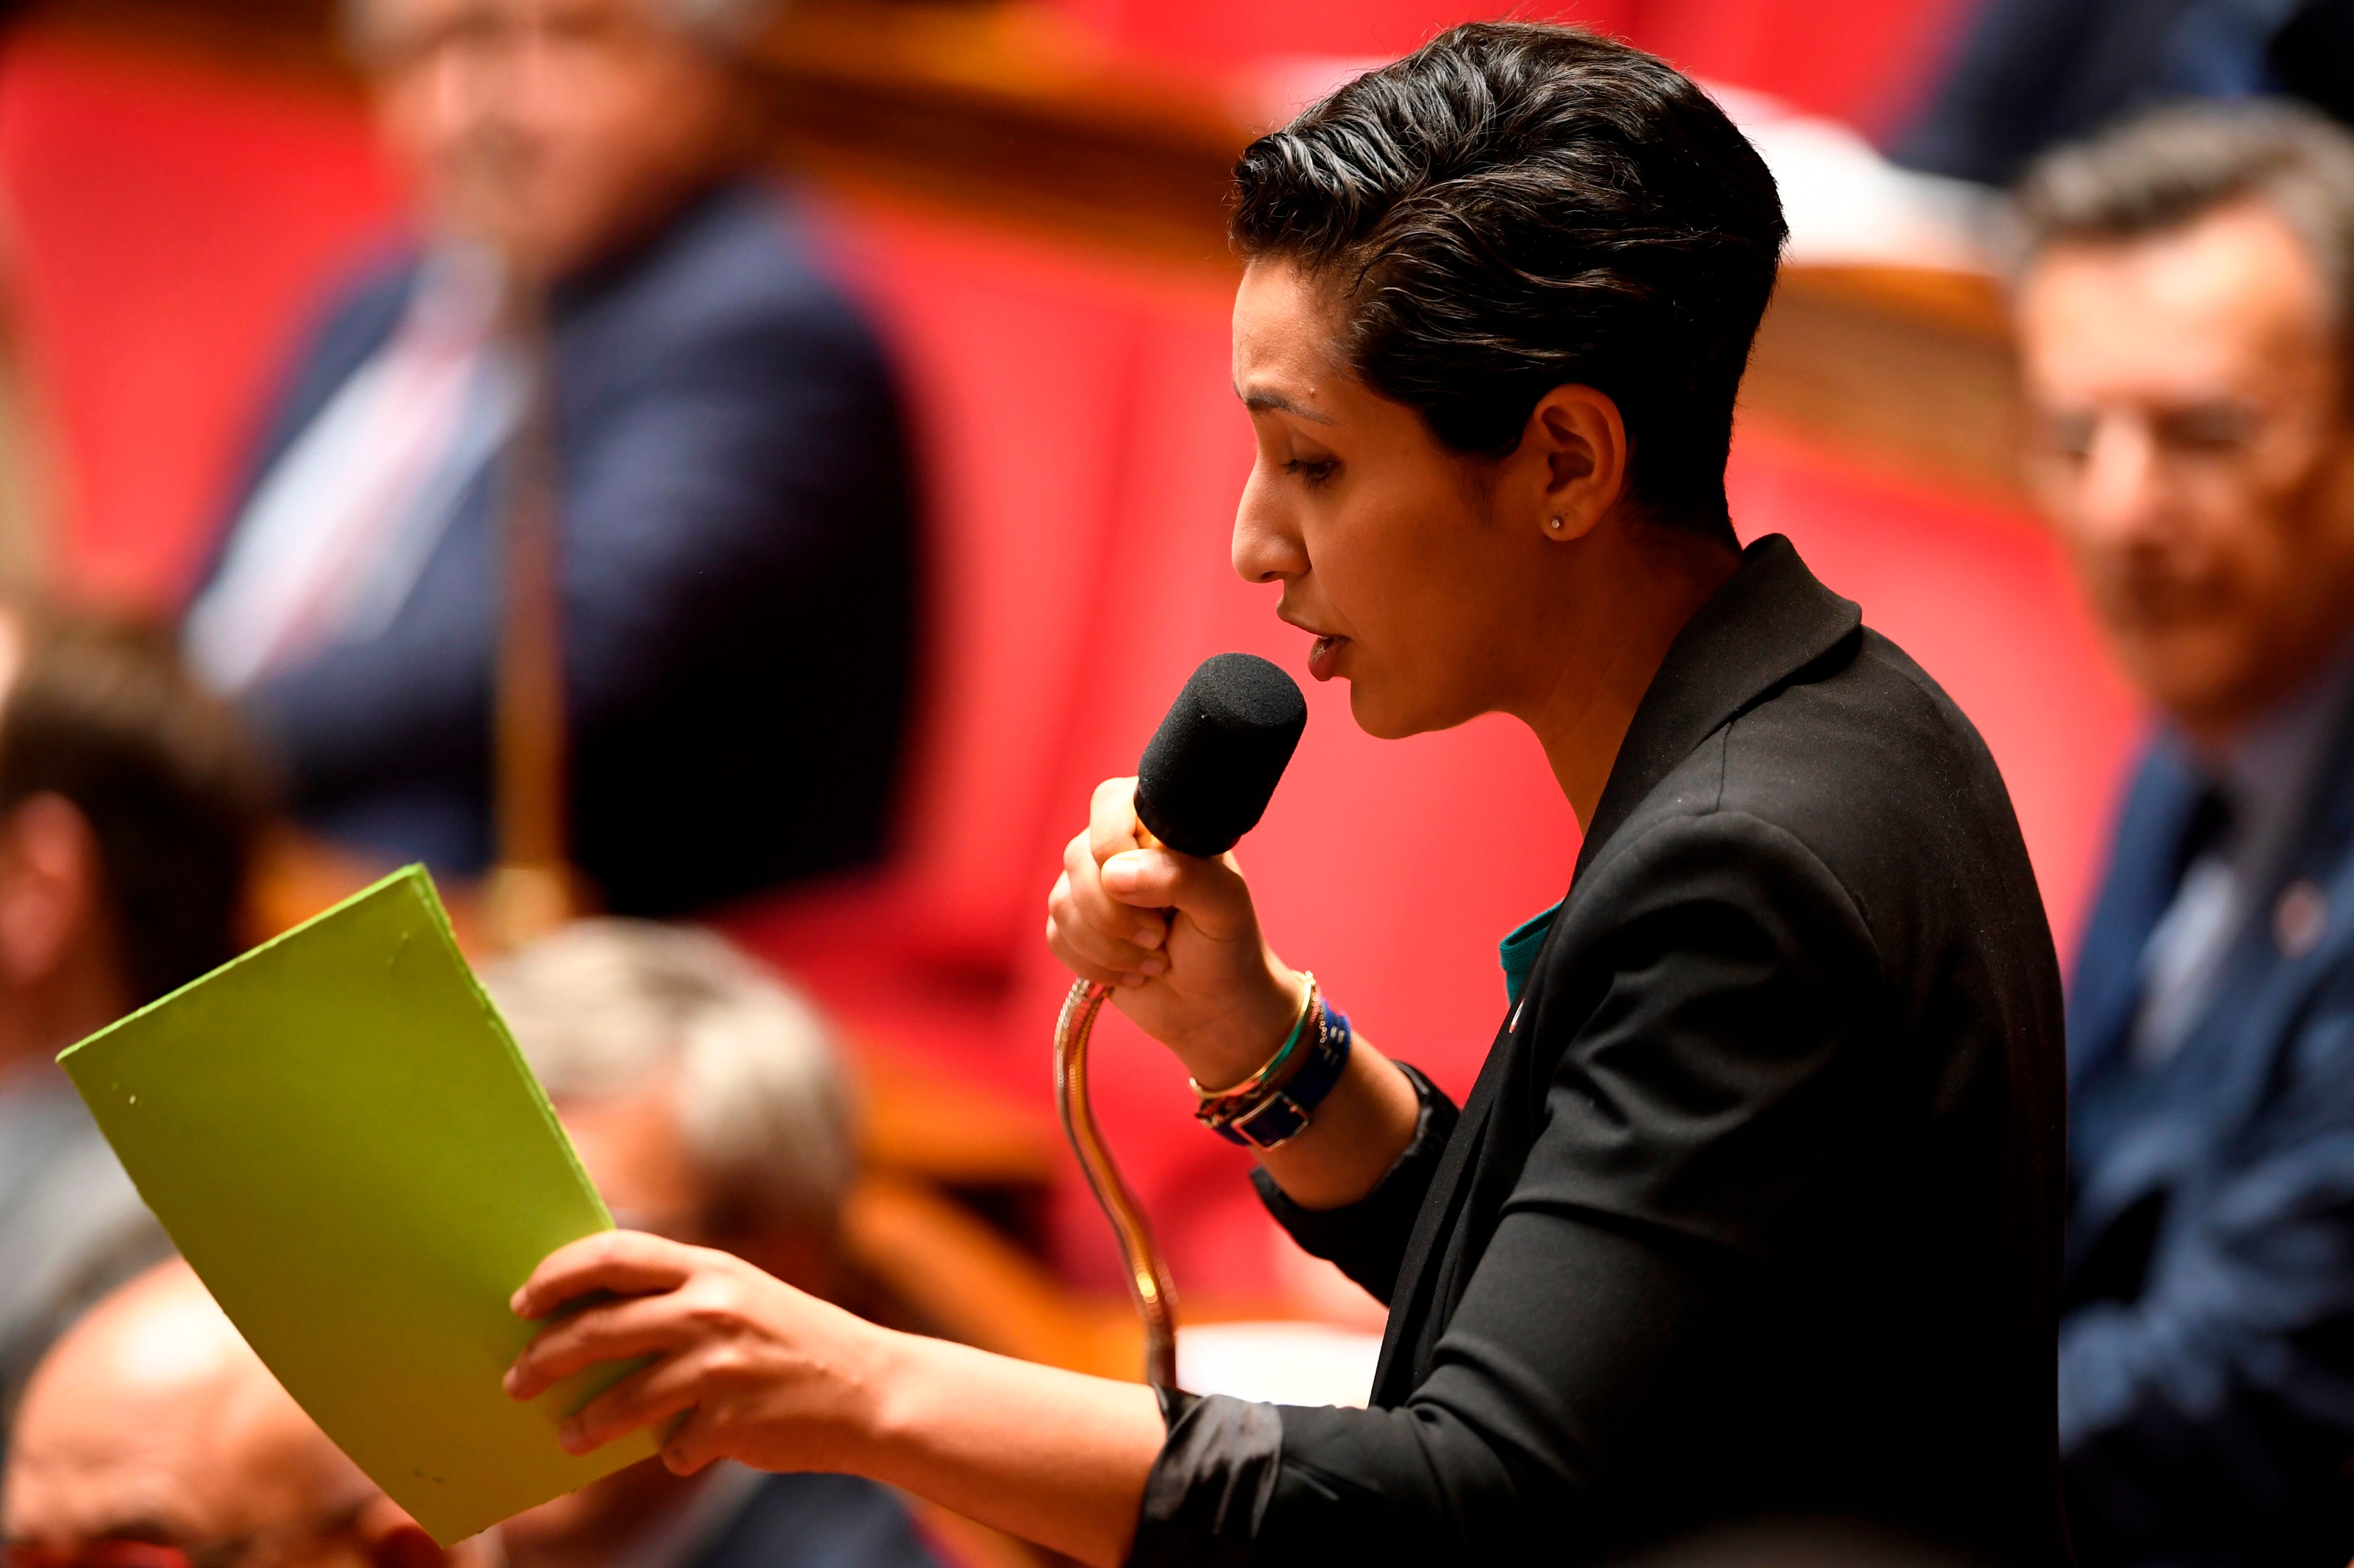 MP Sarah El Haïry has strongly embraced France’s universalist ideal